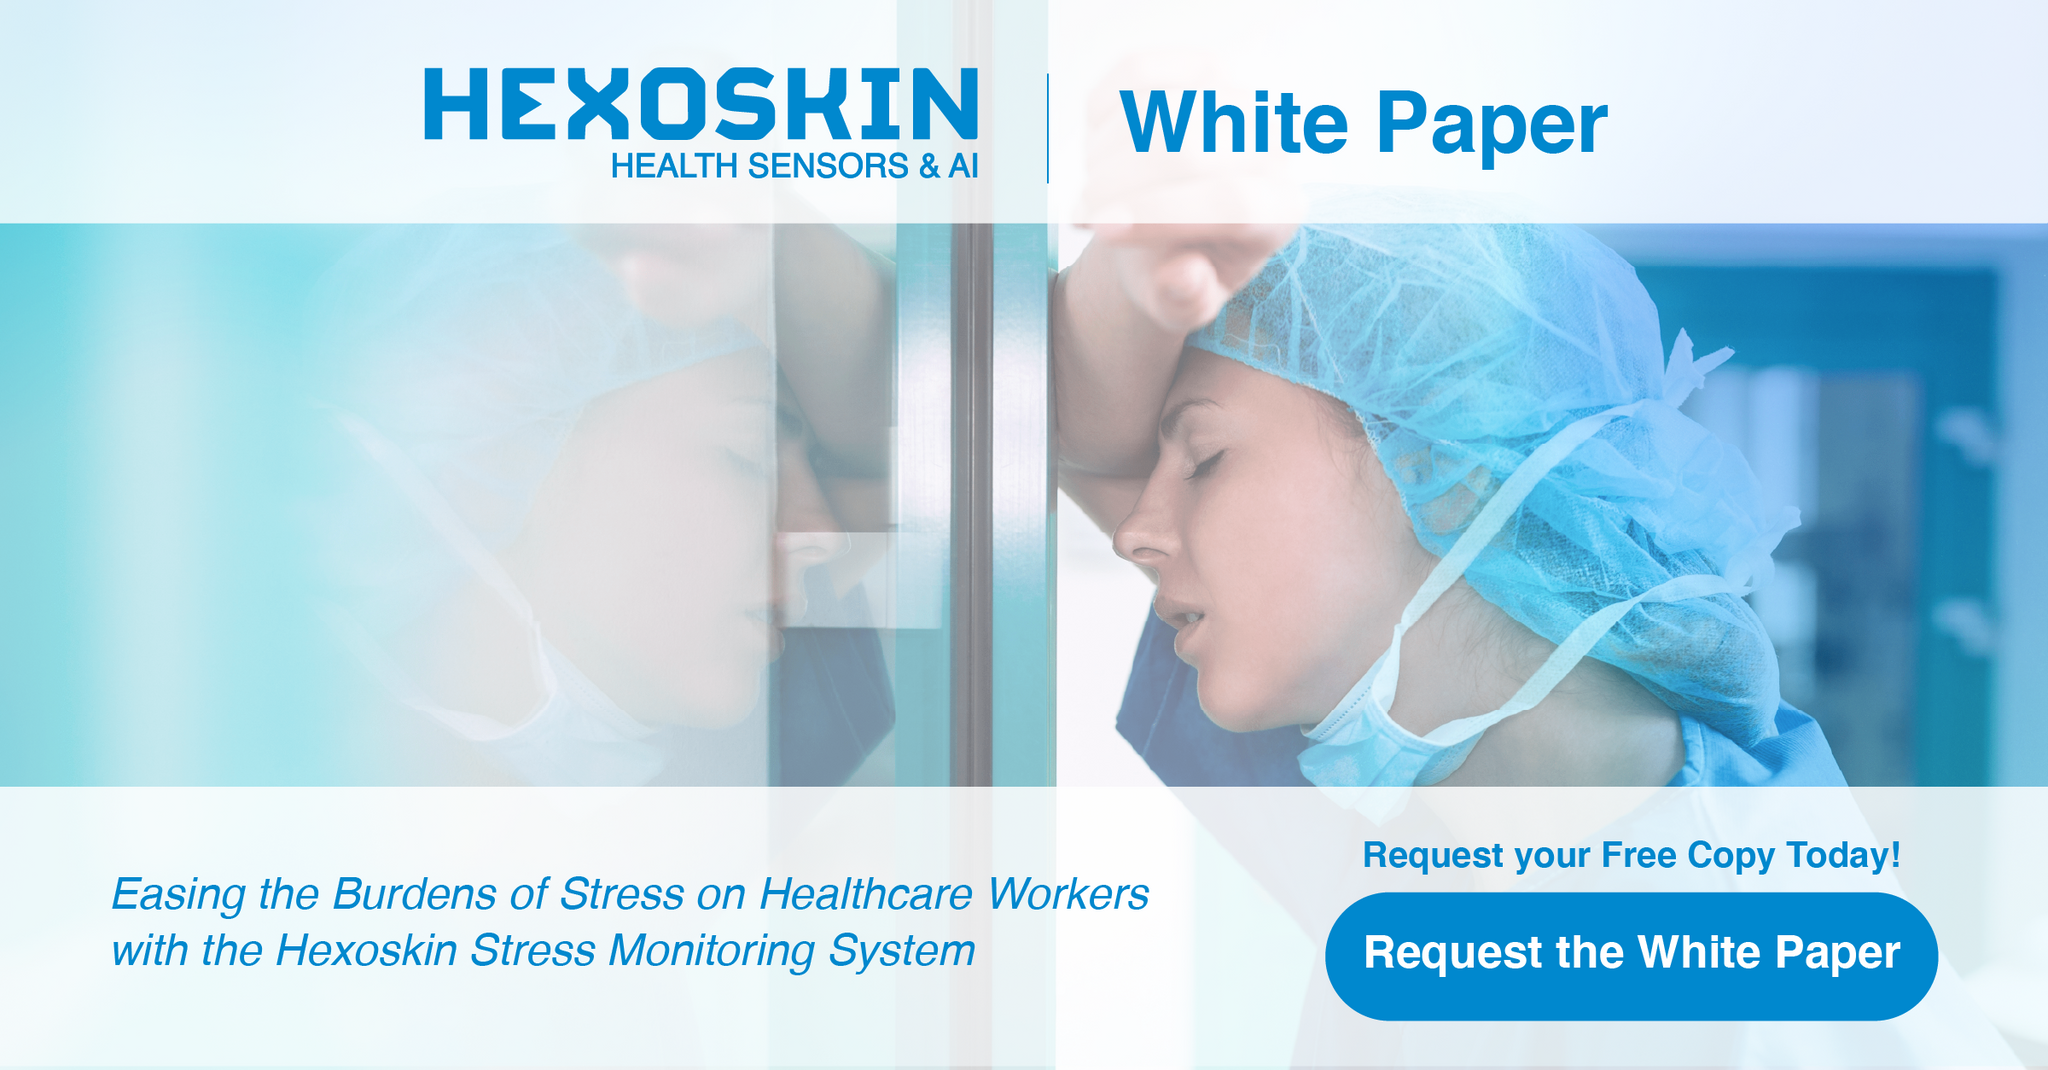 Hexoskin - Stress - PTSD - Healthcare Workers - Nurse Practitioners, Surgeon, Physician, Hospital Staff, Medical Workers